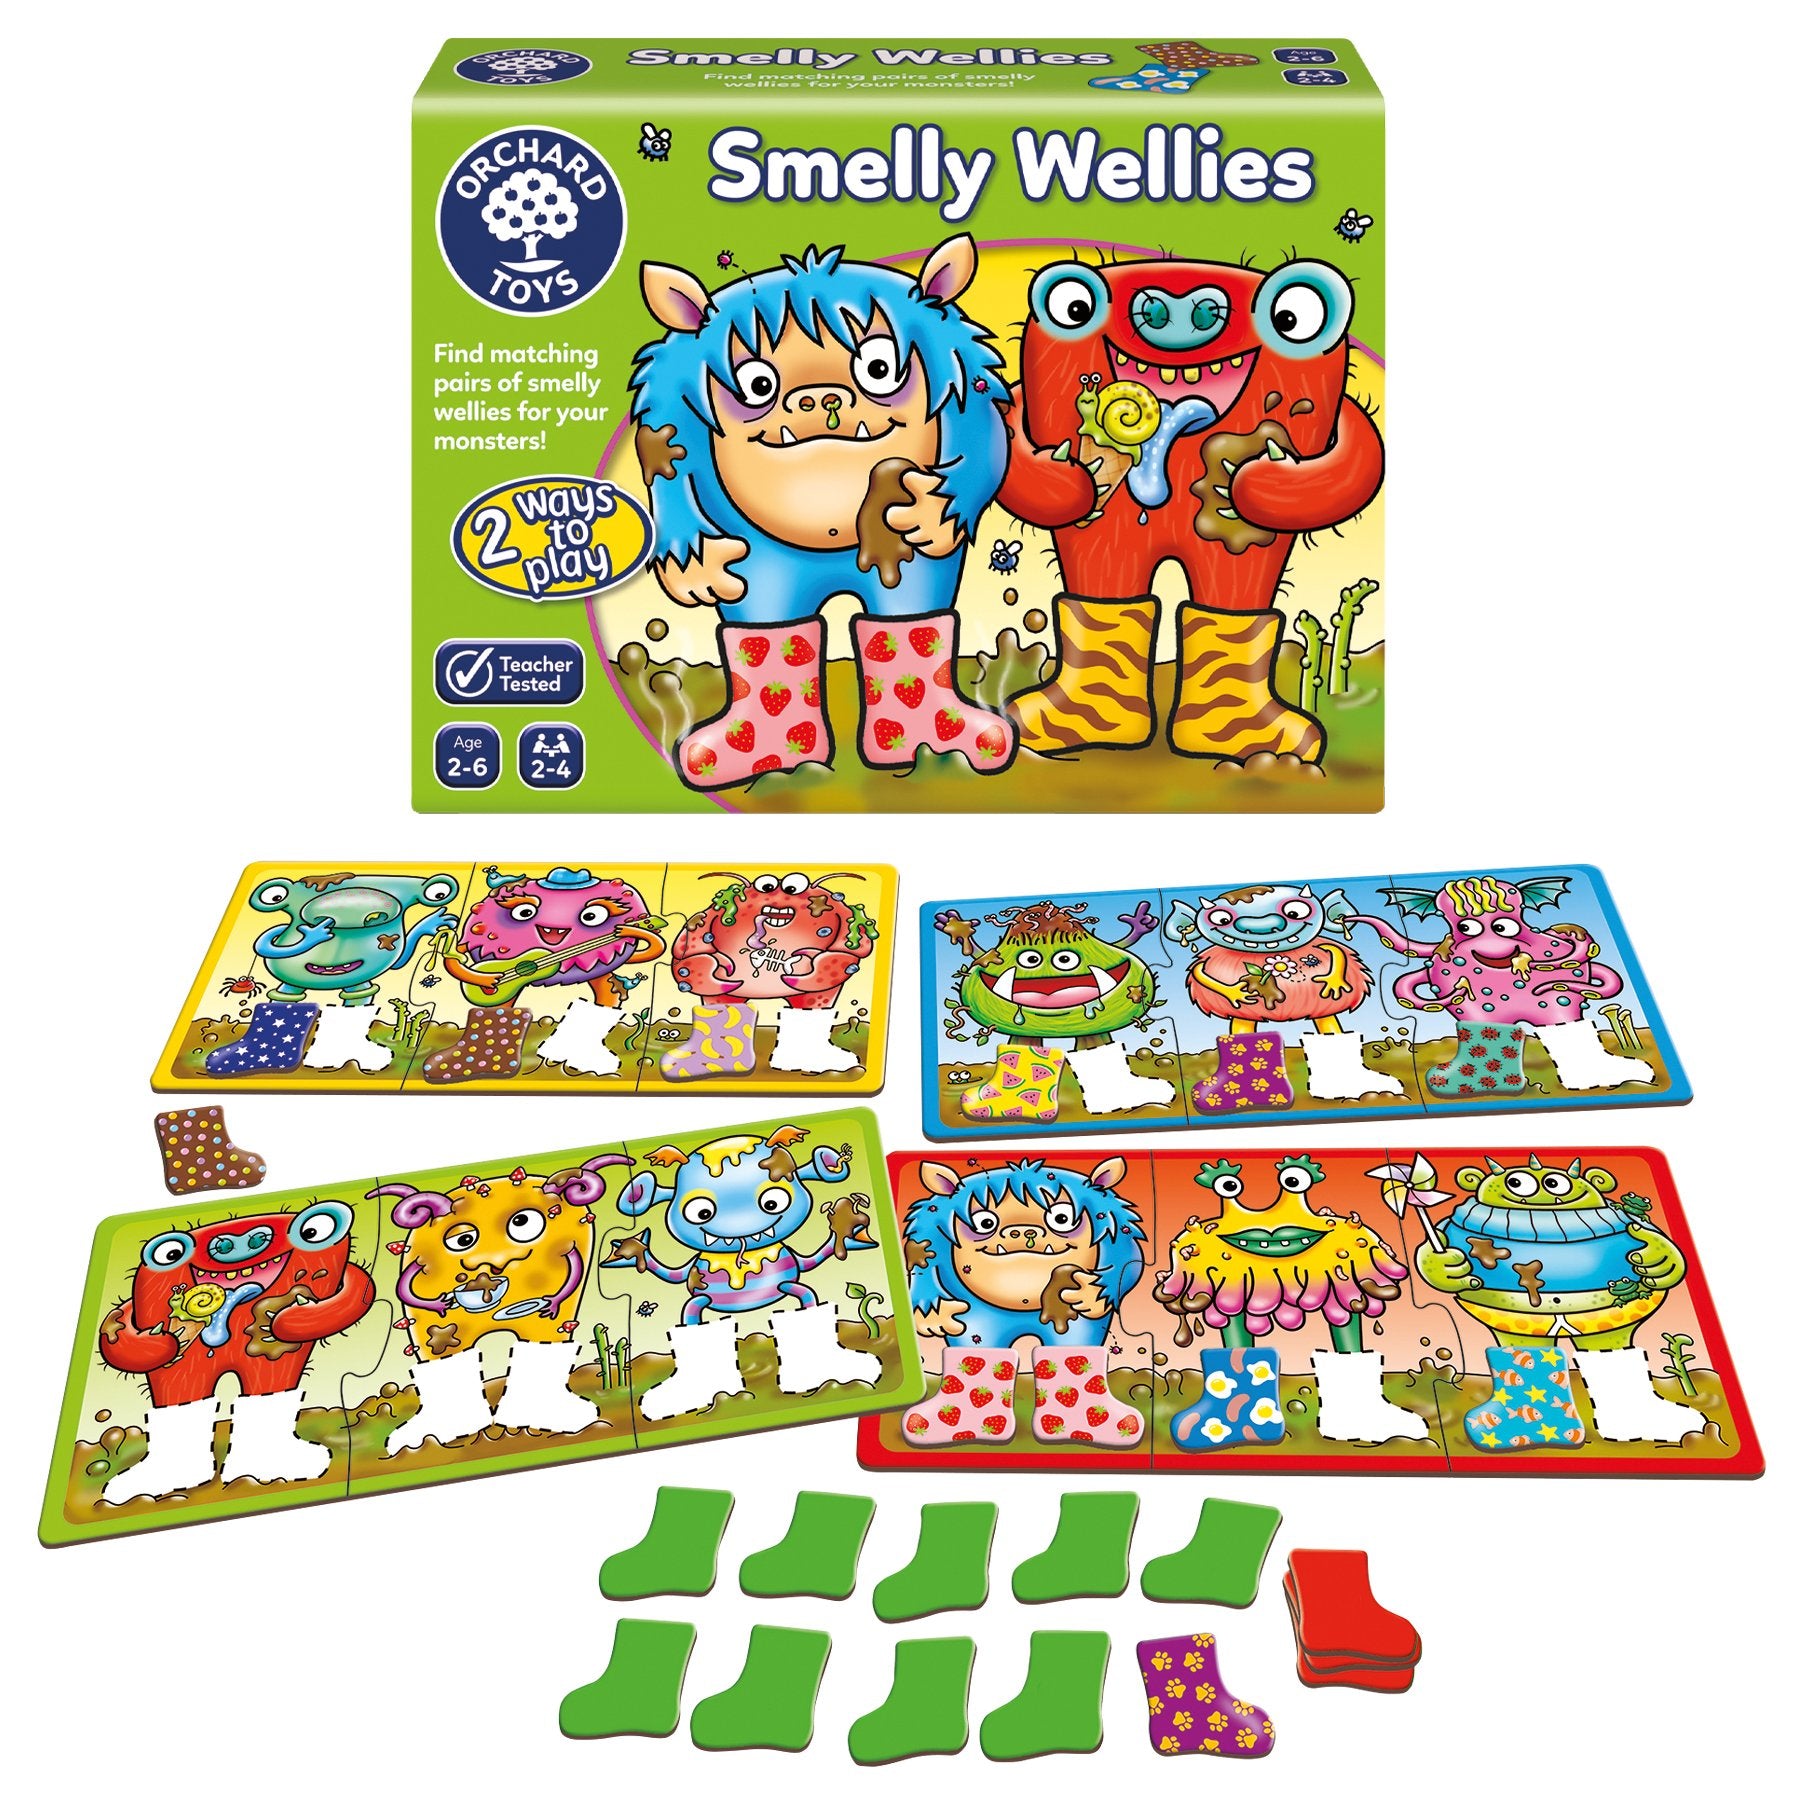 orchard-toys-smelly-wellies-2